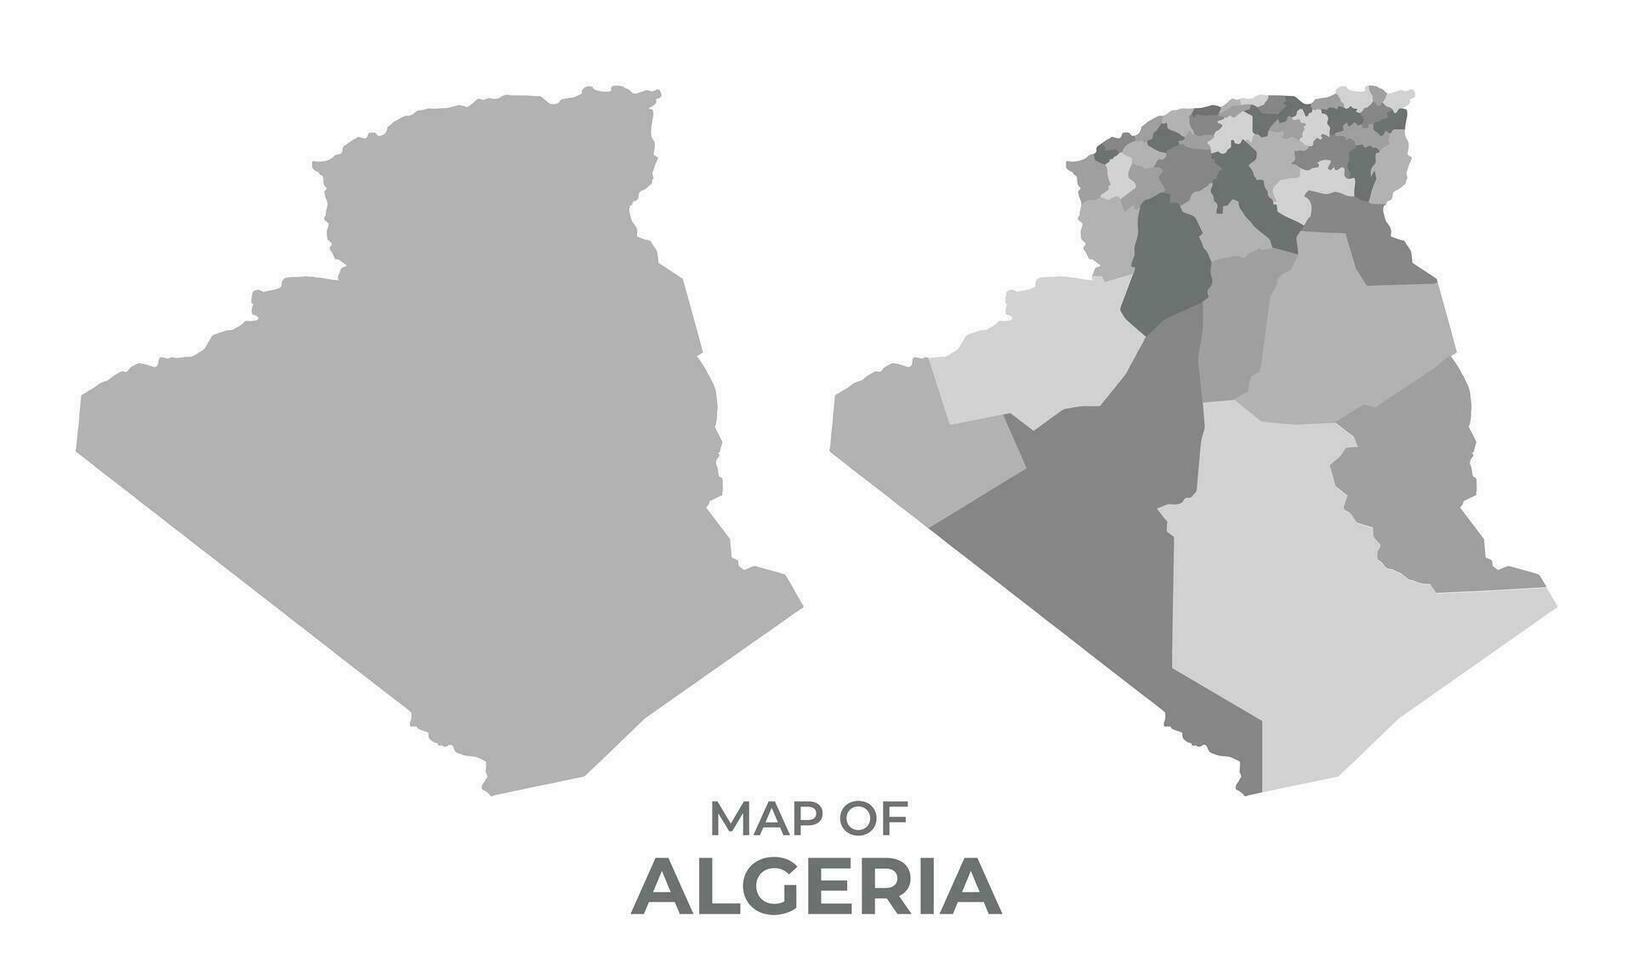 Greyscale vector map of Algeria with regions and simple flat illustration